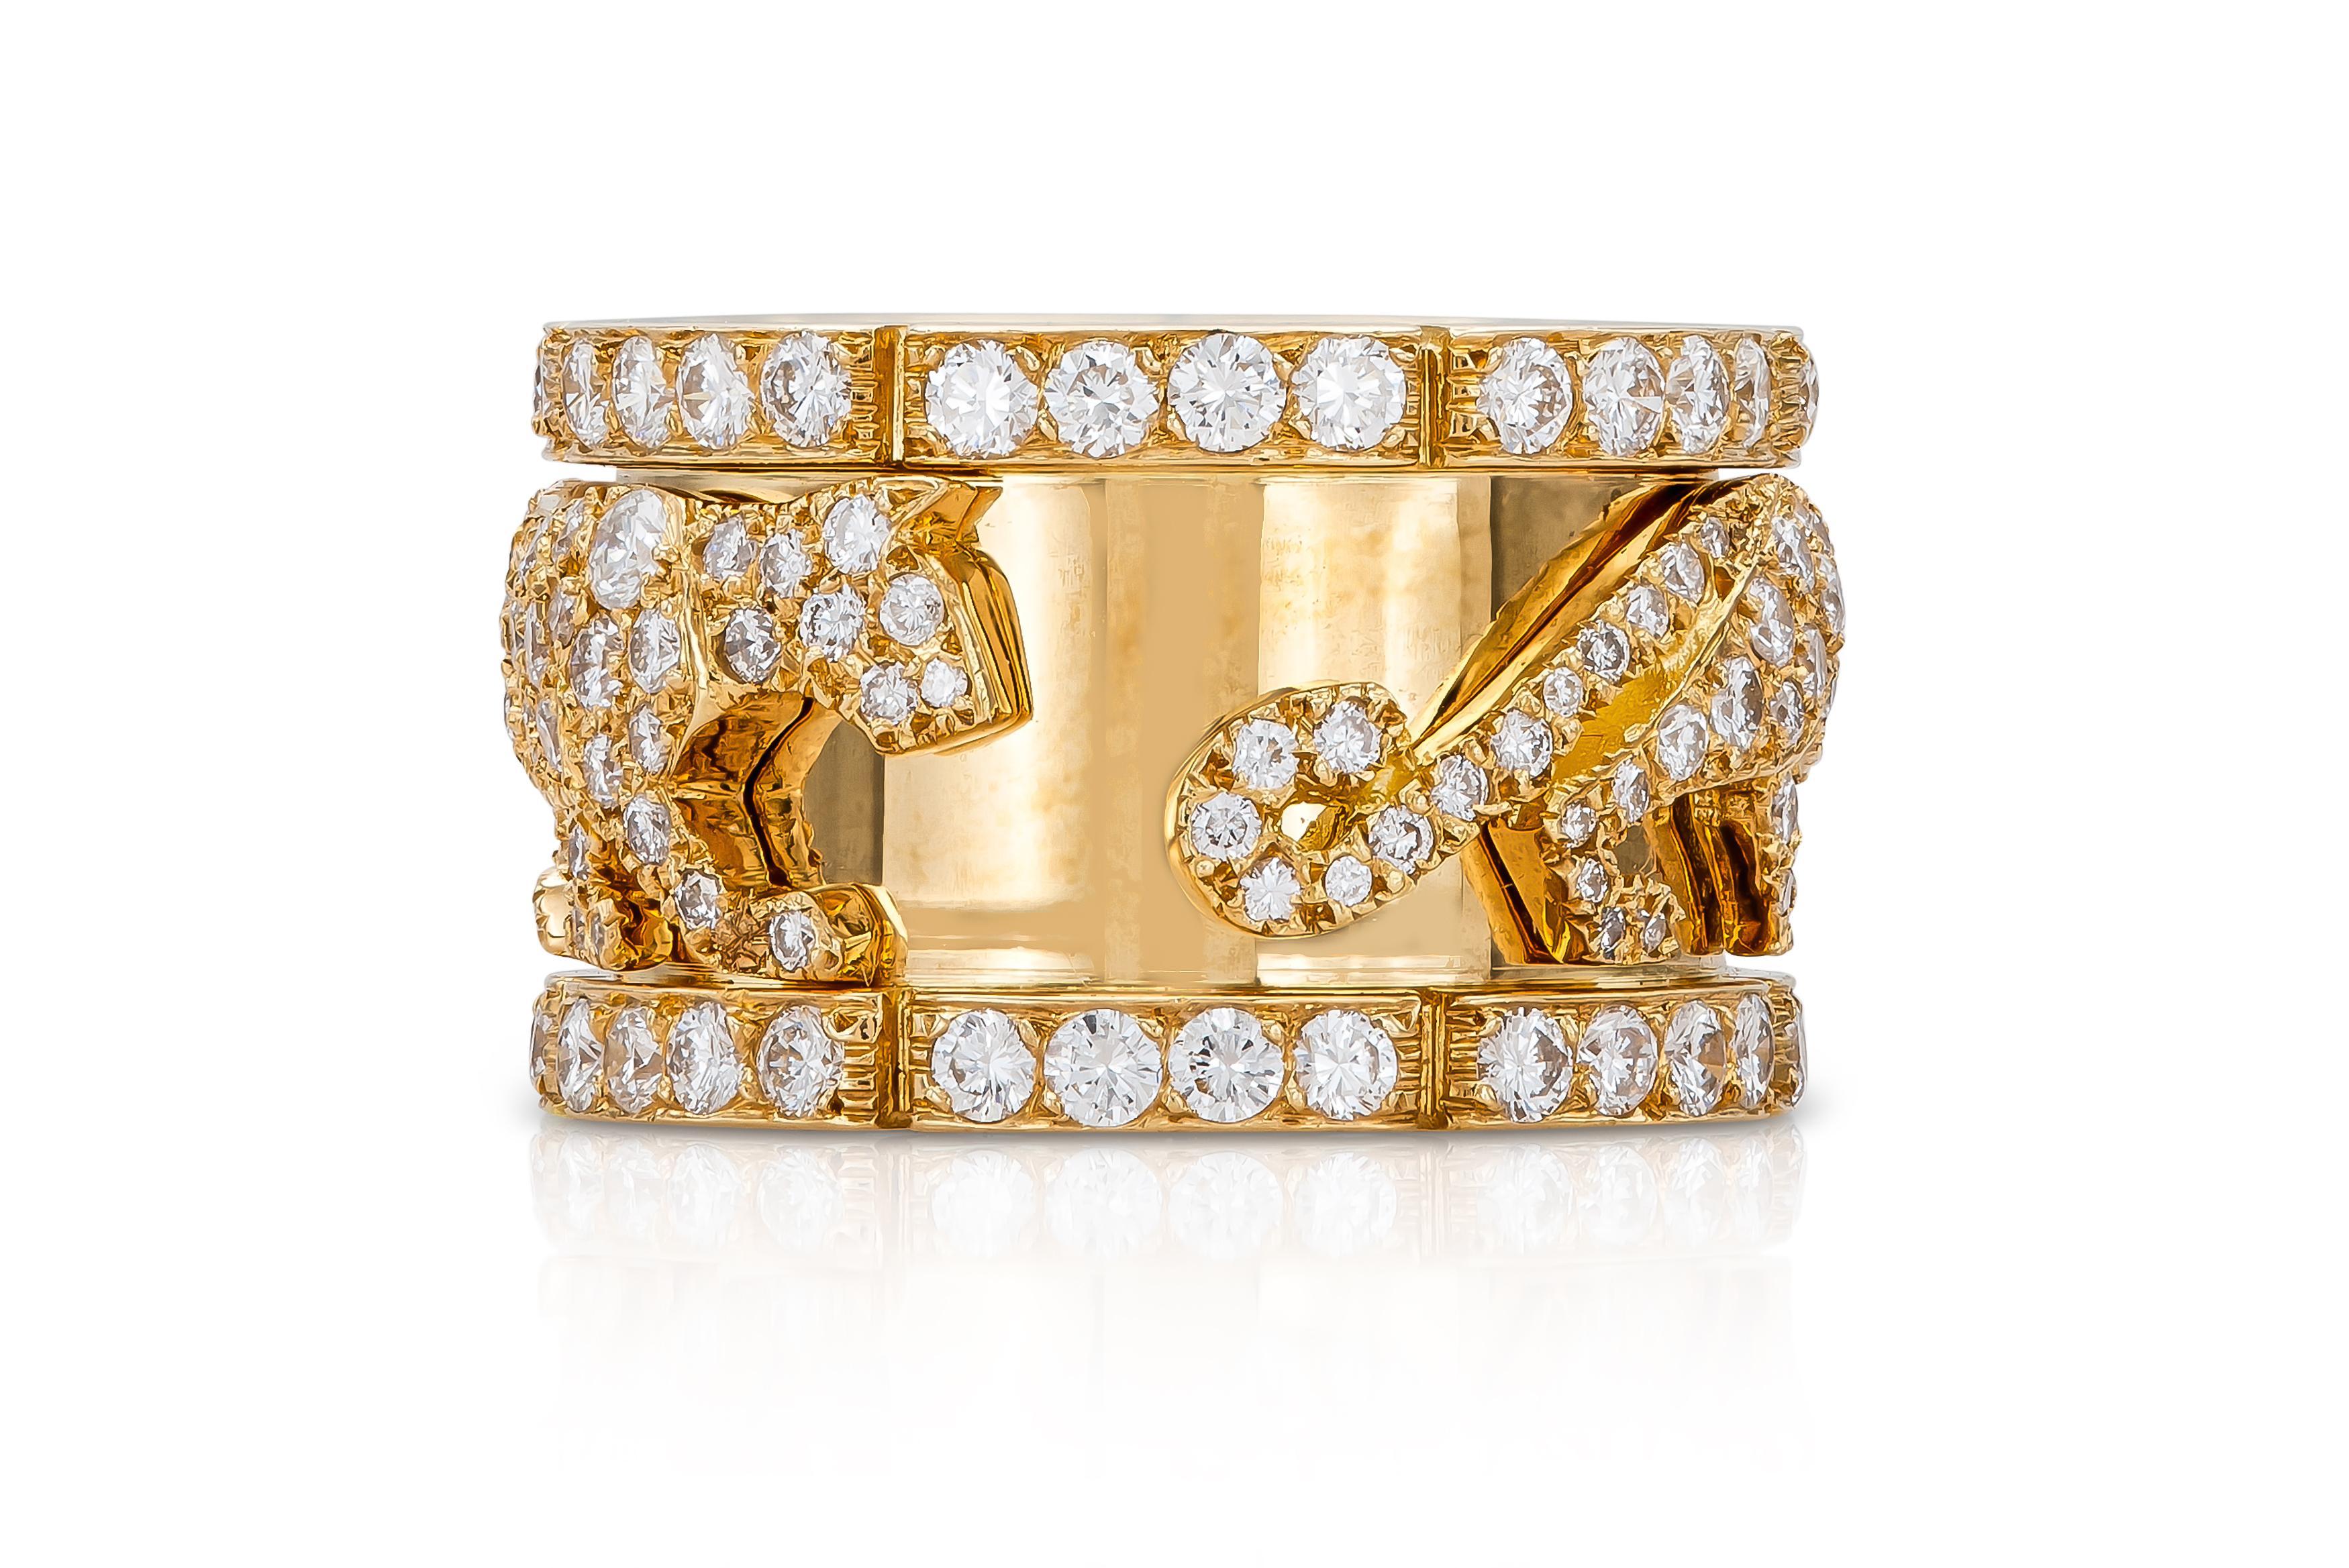 Finely crafted in 18k yellow gold with Round Brilliant cut diamonds weighing approximately a total of 4.00 carats.
Signed by Cartier, from their Walking Panthere collection.
Size 52 (US 6)